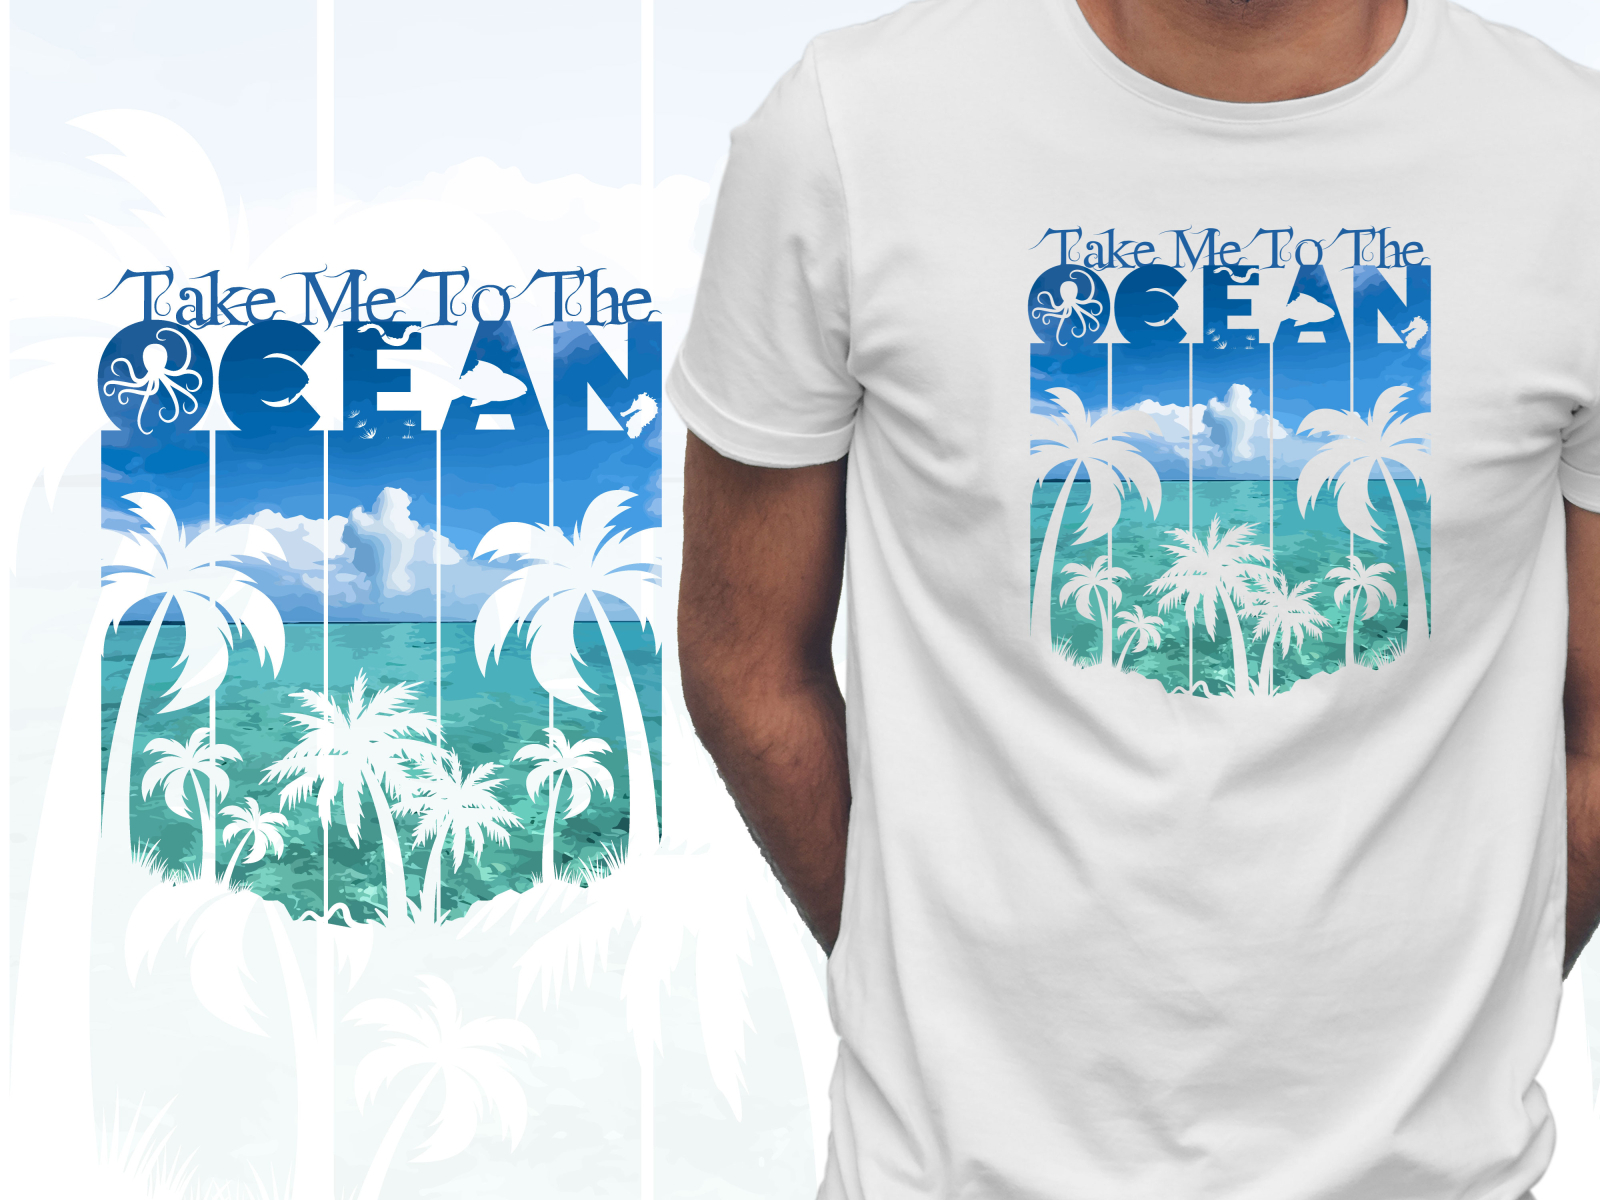 Take me to the ocean wave t shirt design by MD. WASIM AKRAM on Dribbble